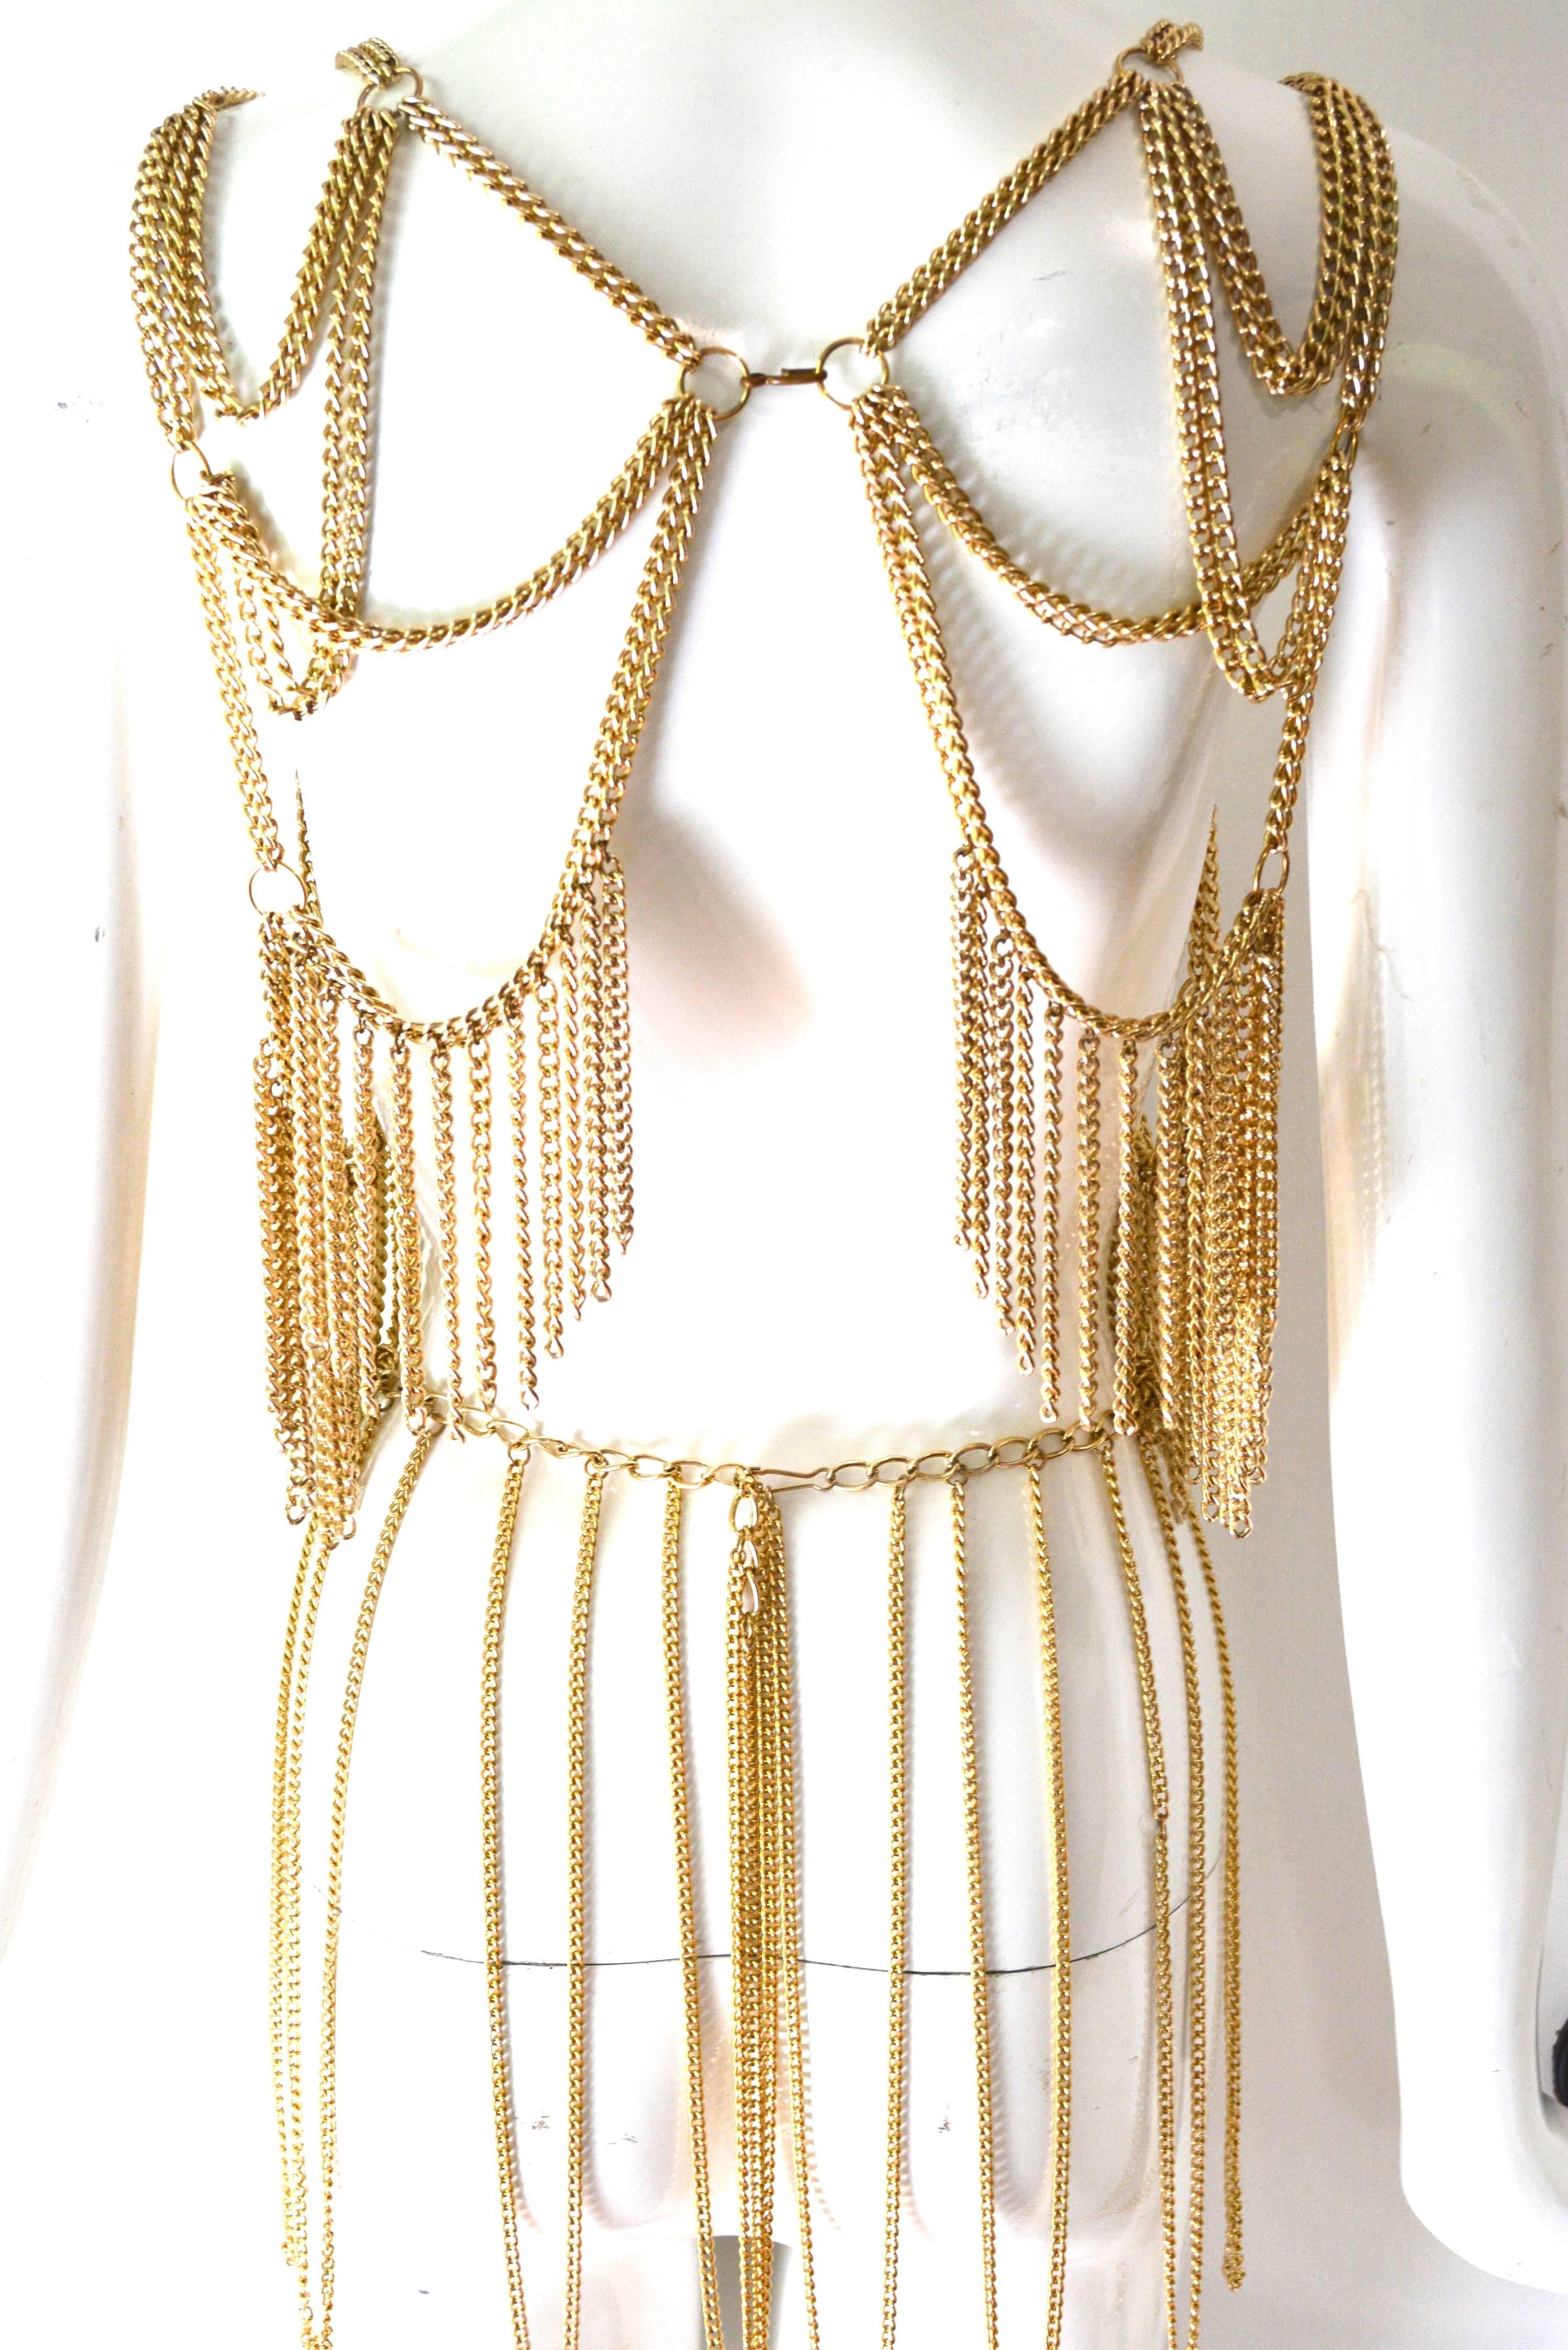 1960s showgirl fringe metal top and belt set, unsigned. Has older clasp styles and lighter 60s chain.  Rare duo to find, excellent condition with some tarnish to hooks and rings. Top fits about an S-M. Could be adjusted with the addition of chain in